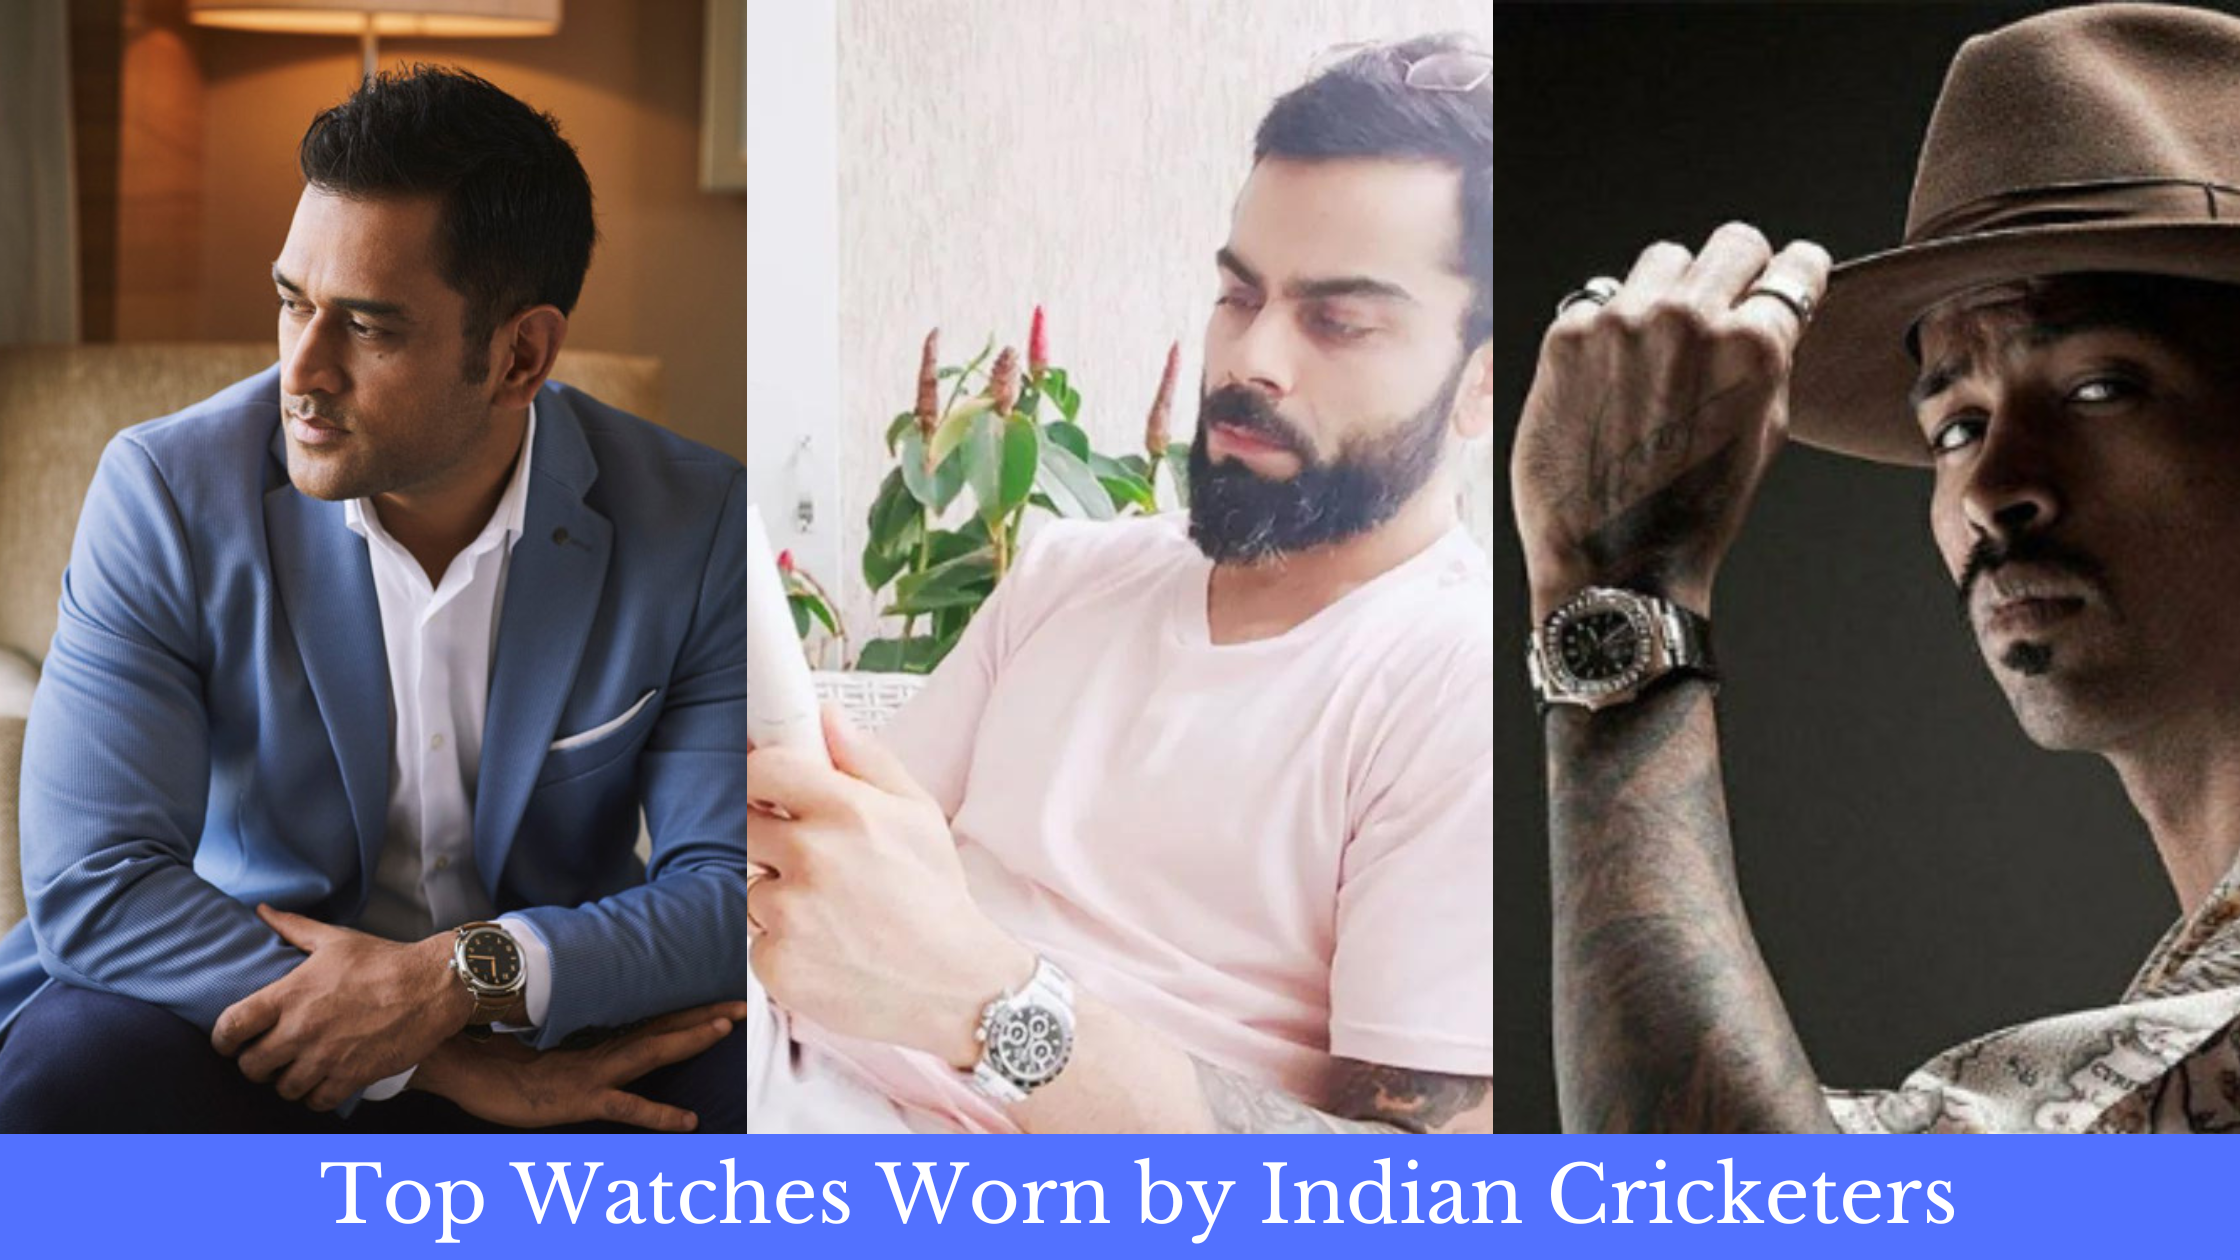 Top Watches Worn by Indian Cricketers